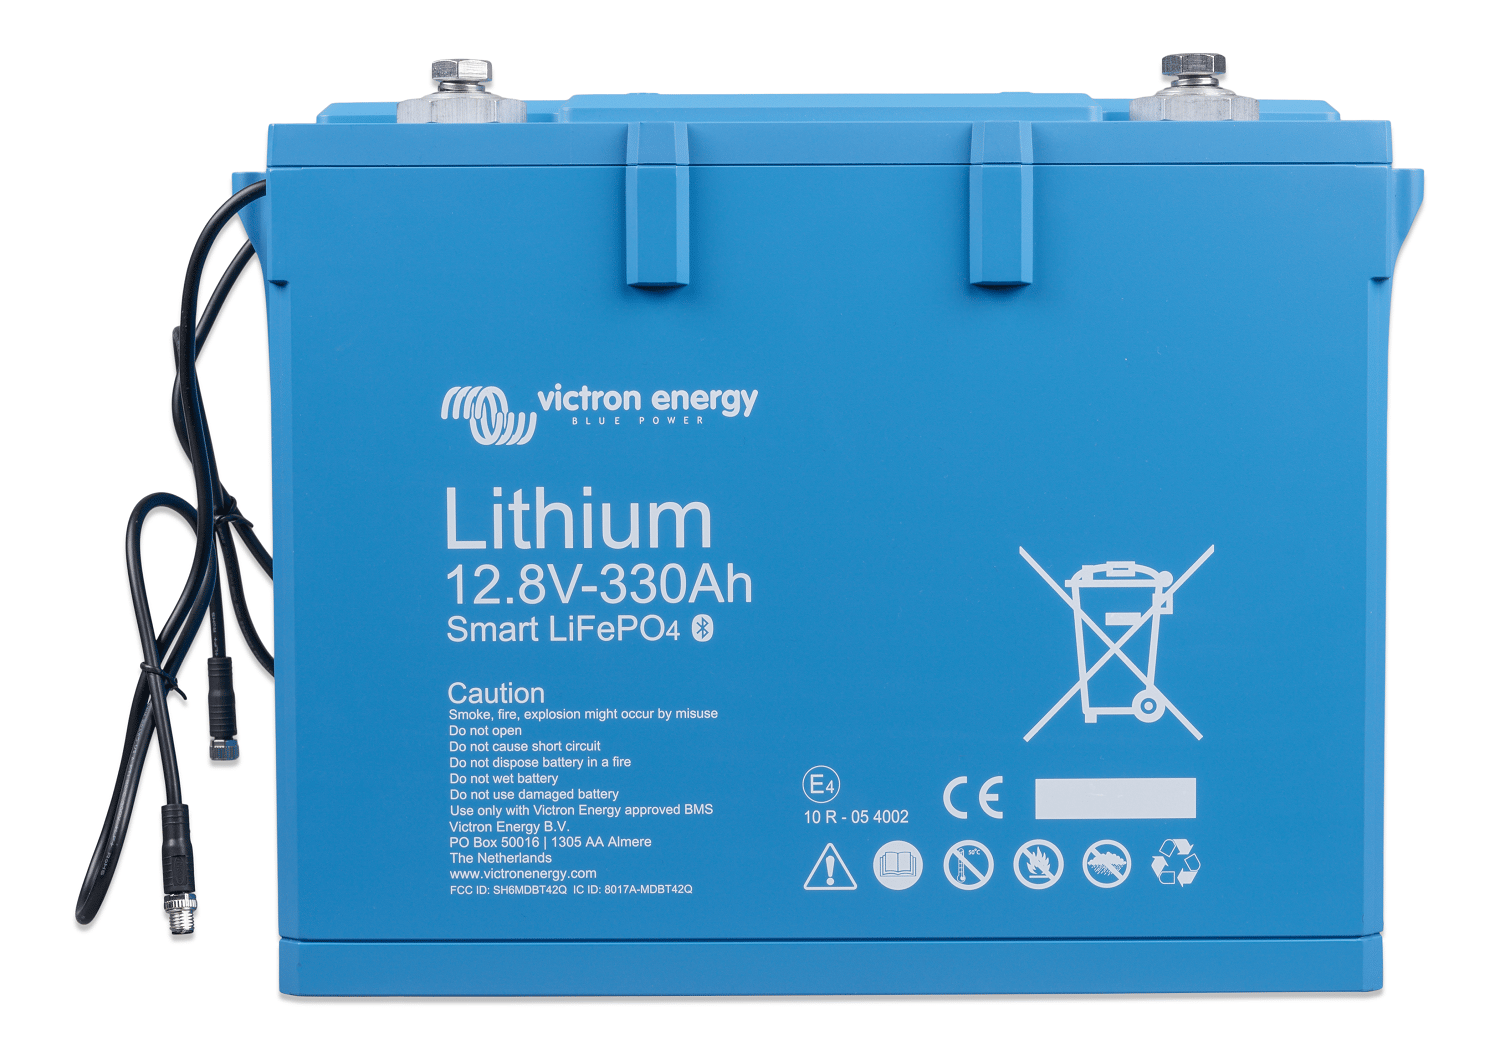 What is the lifespan of a lithium iron phosphate battery?